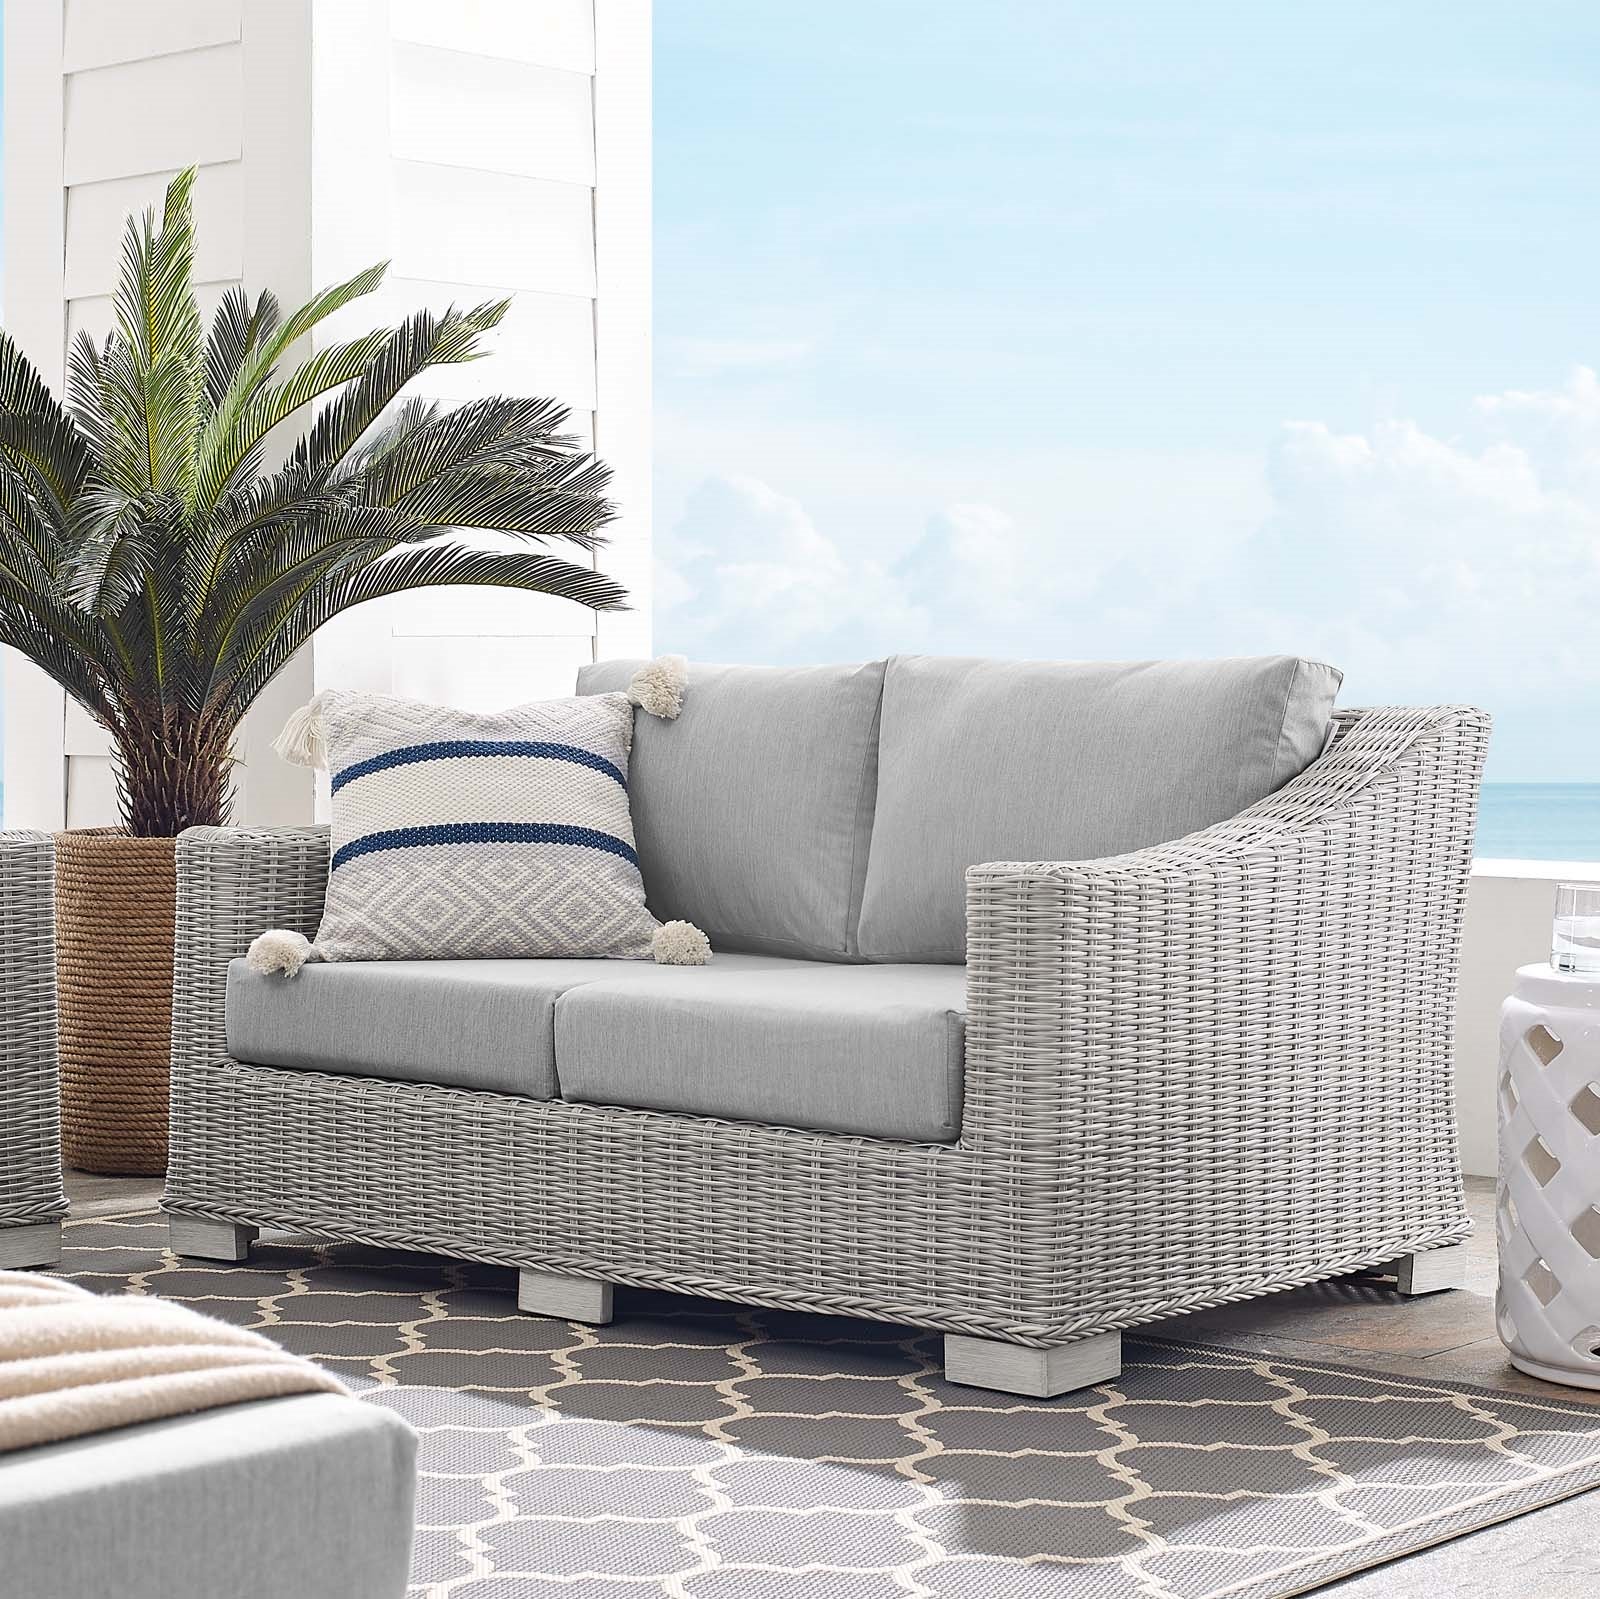 Conway Outdoor Patio Wicker Rattan Loveseat in Light Gray Gray - Hyme